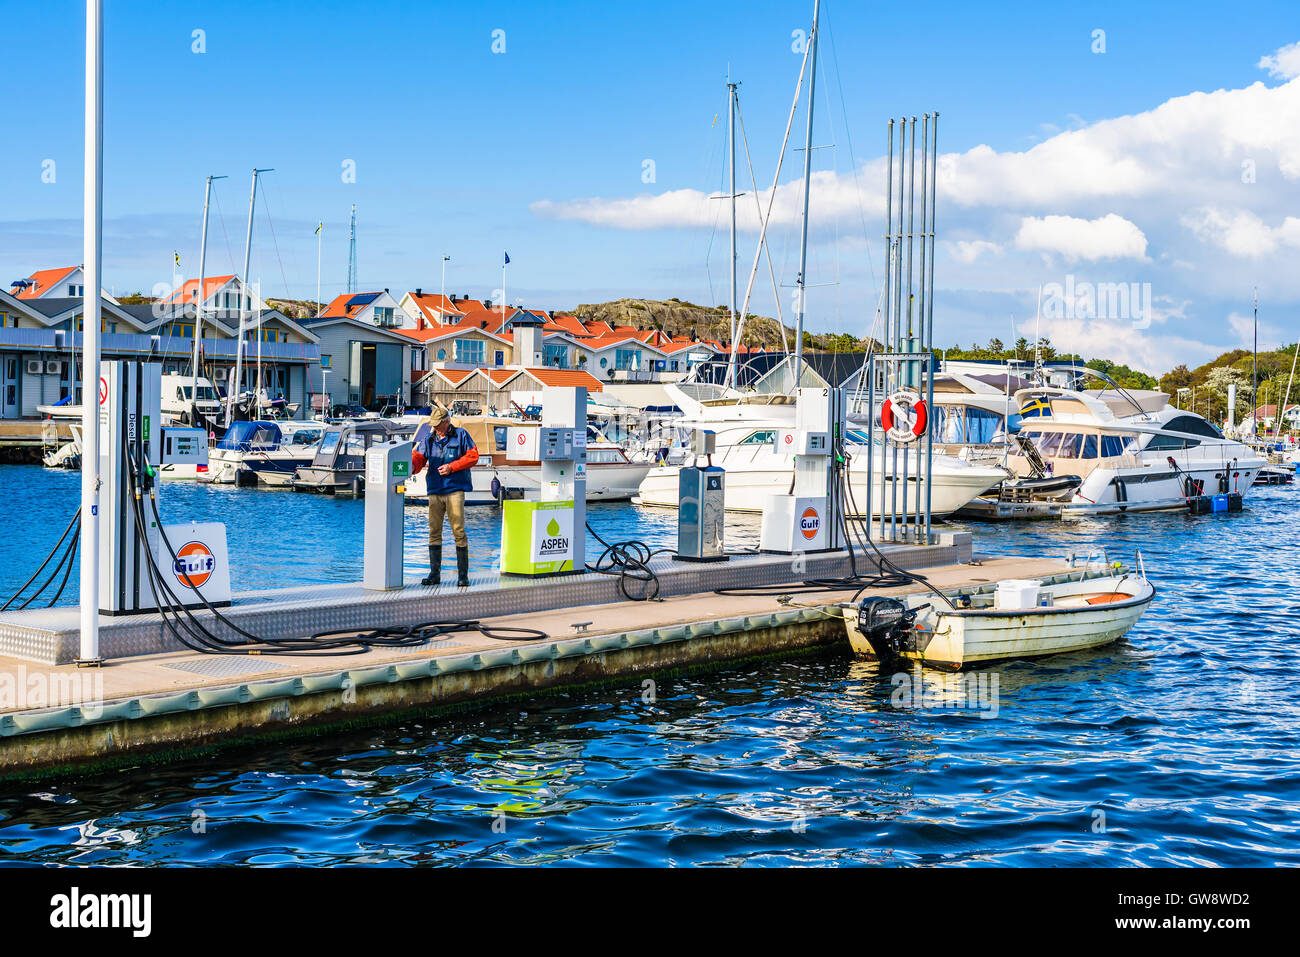 Marstrand, Sweden - September 8, 2016: Male fisherman at a marine fueling station to refuel the small motorboat. Real people in Stock Photo